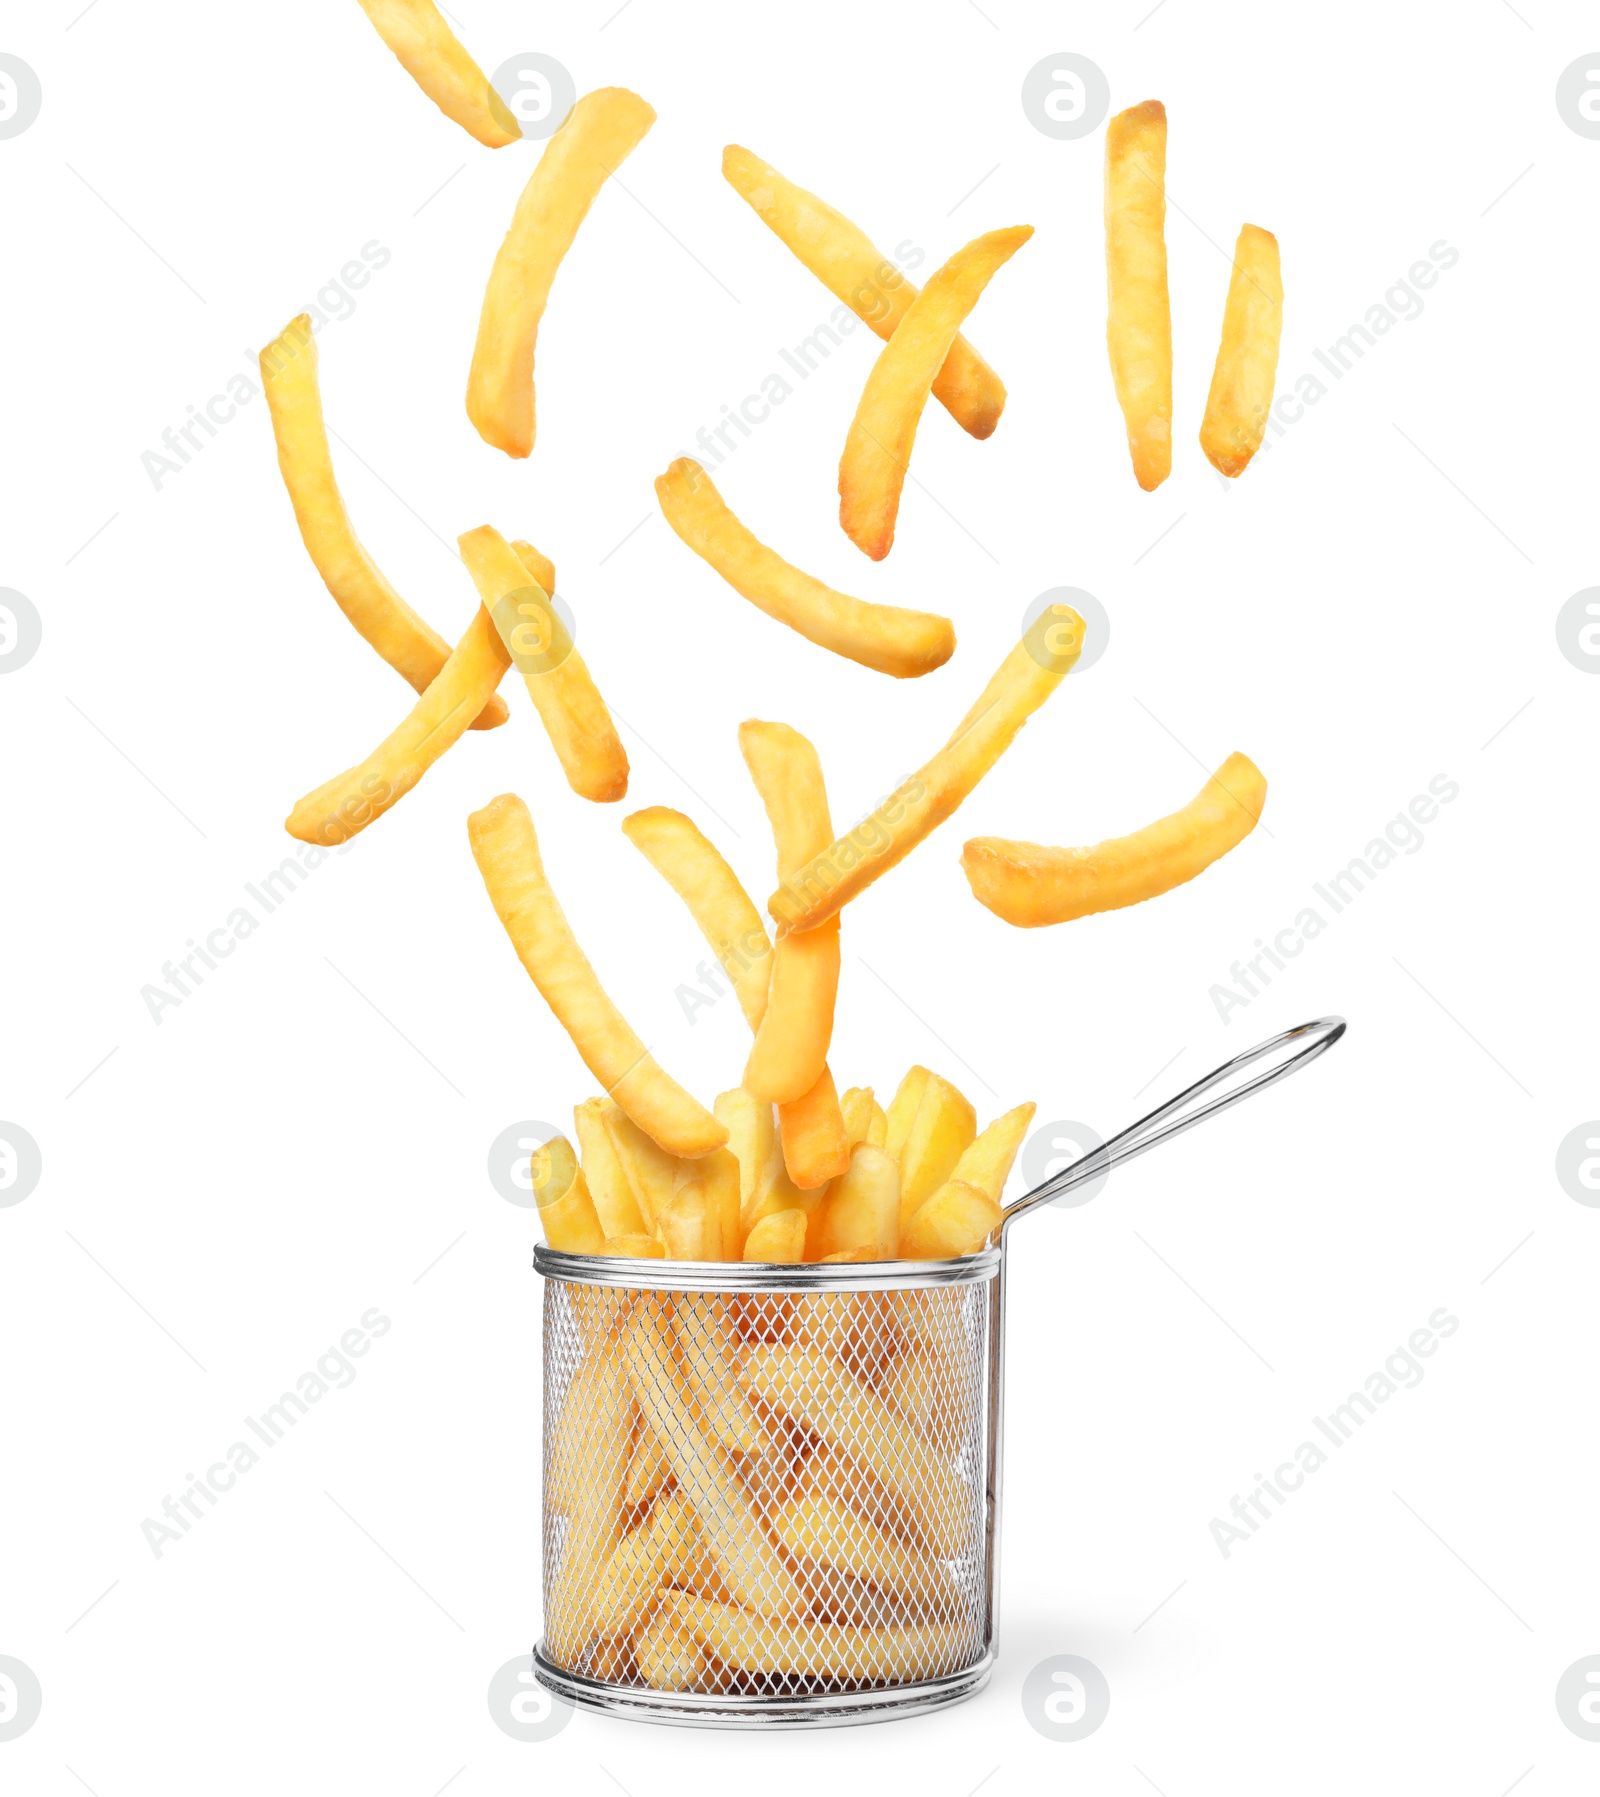 Image of Tasty French fries falling into metal basket on white background